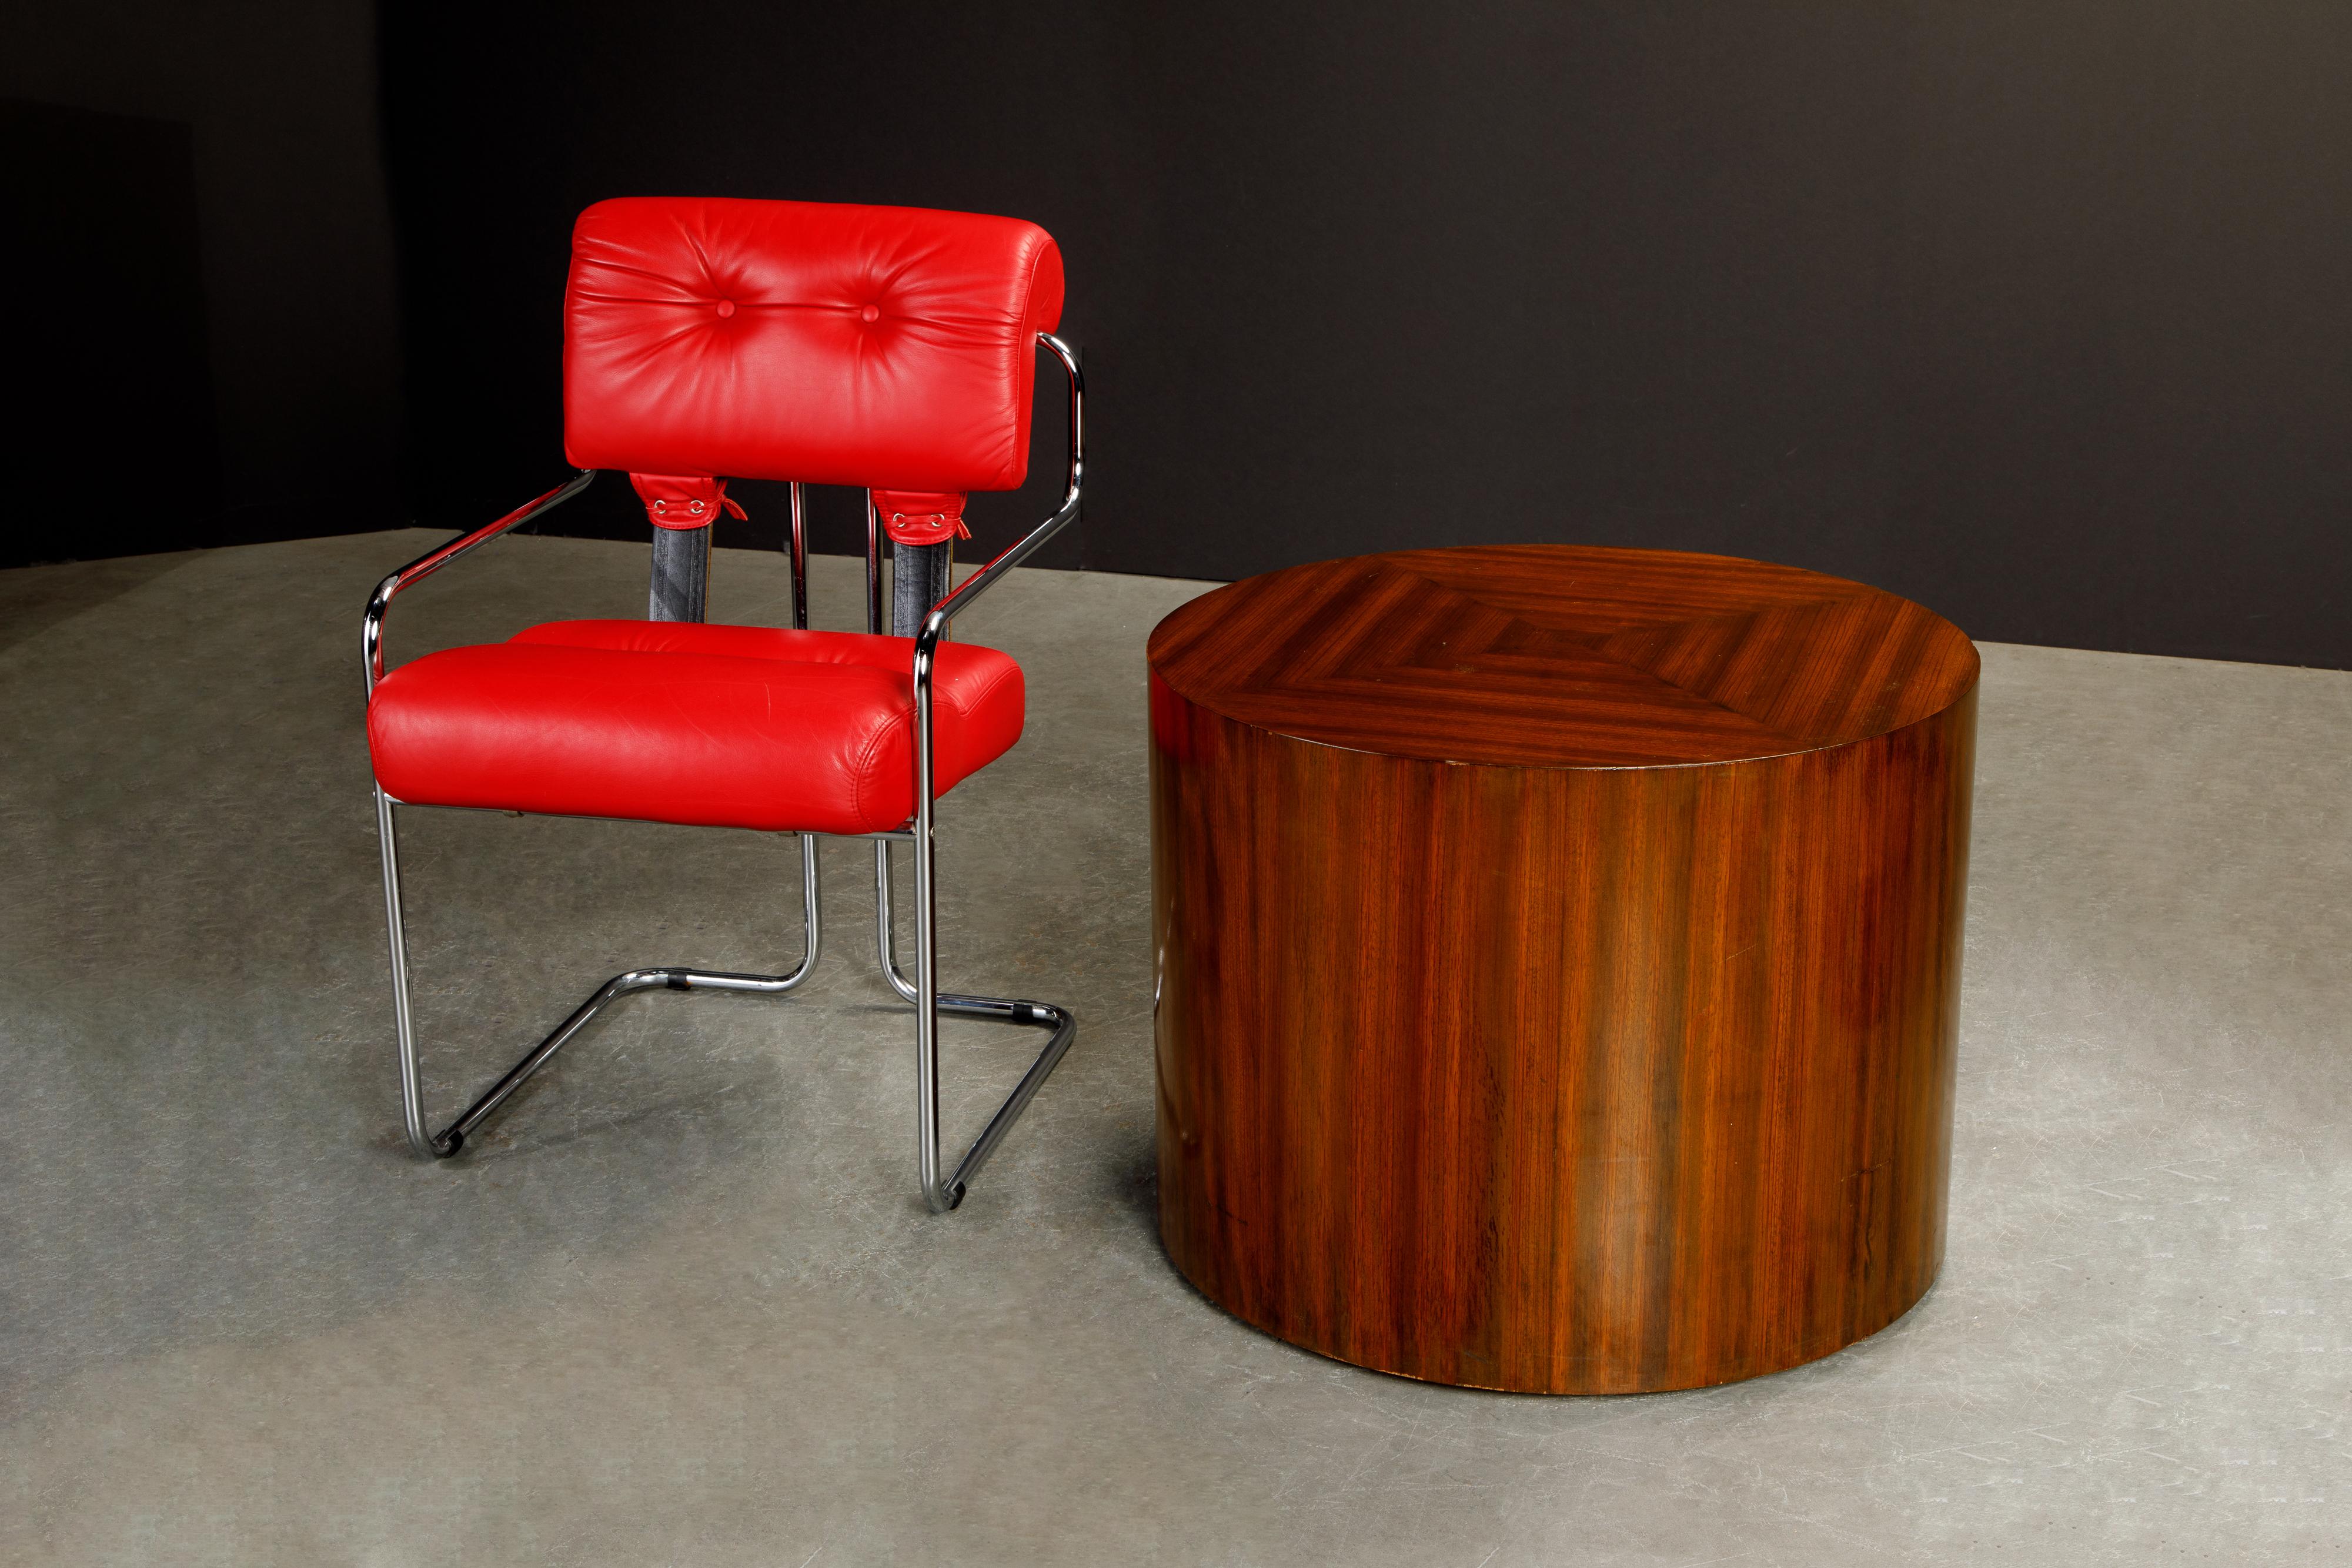 Pair of Mid-Century Modern Drum Form Wood Side Tables / Pedestals, circa 1970s 1